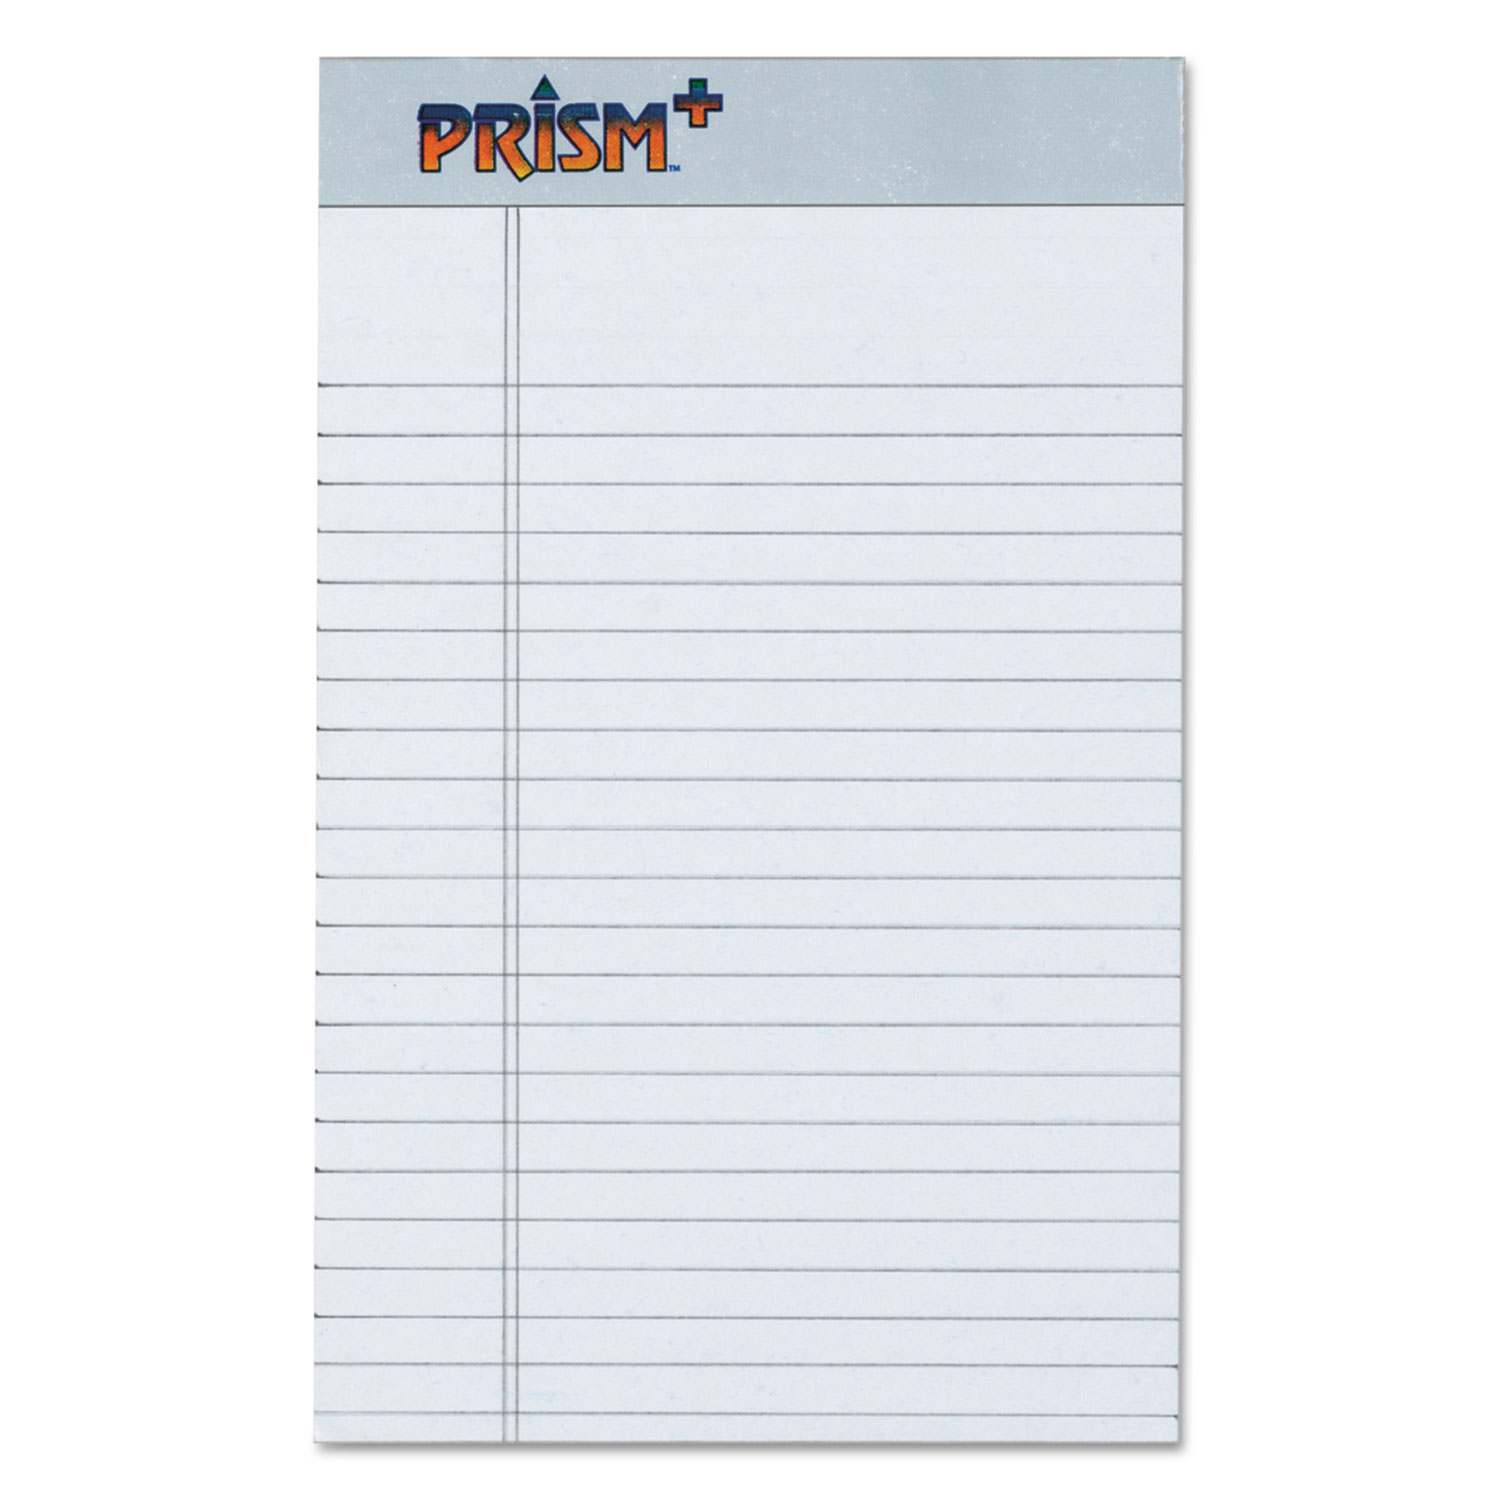  TOPS 63060 Prism + Writing Pads, Narrow Rule, 5 x 8, Pastel Gray, 50 Sheets, 12/Pack (TOP63060) 